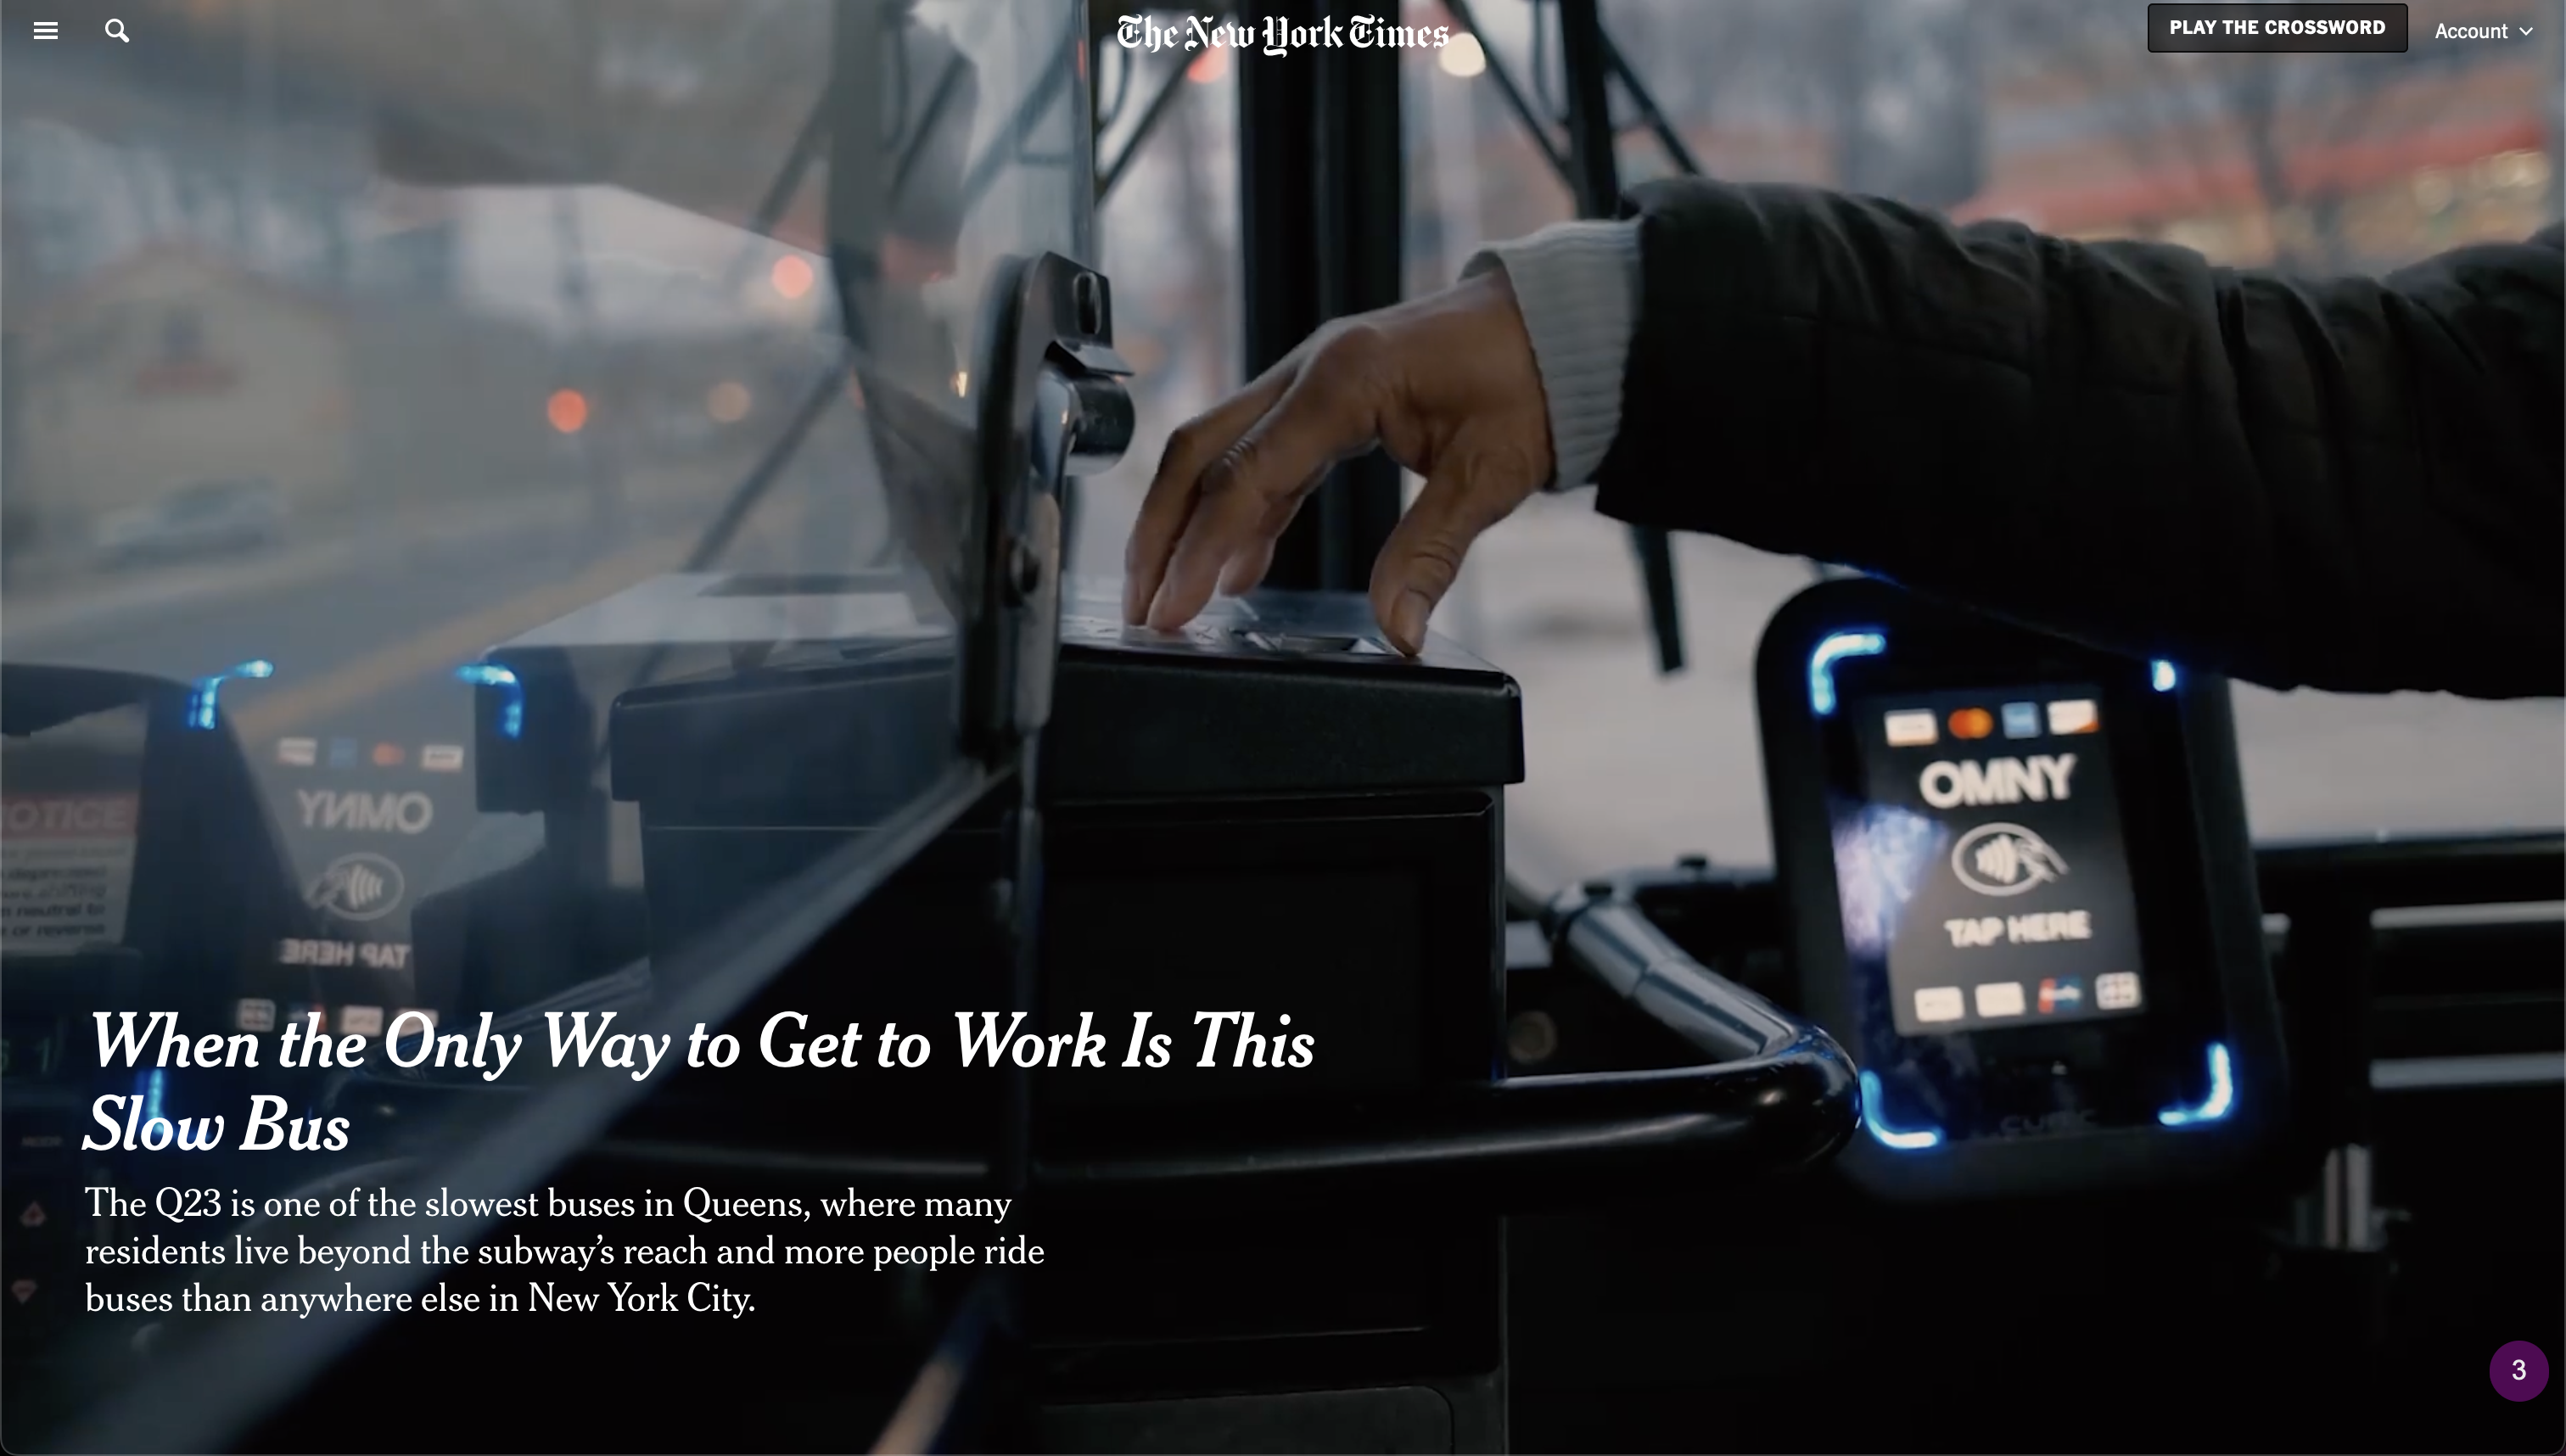 for The New York Times: When the Only Way to Get to Work Is This Slow Bus